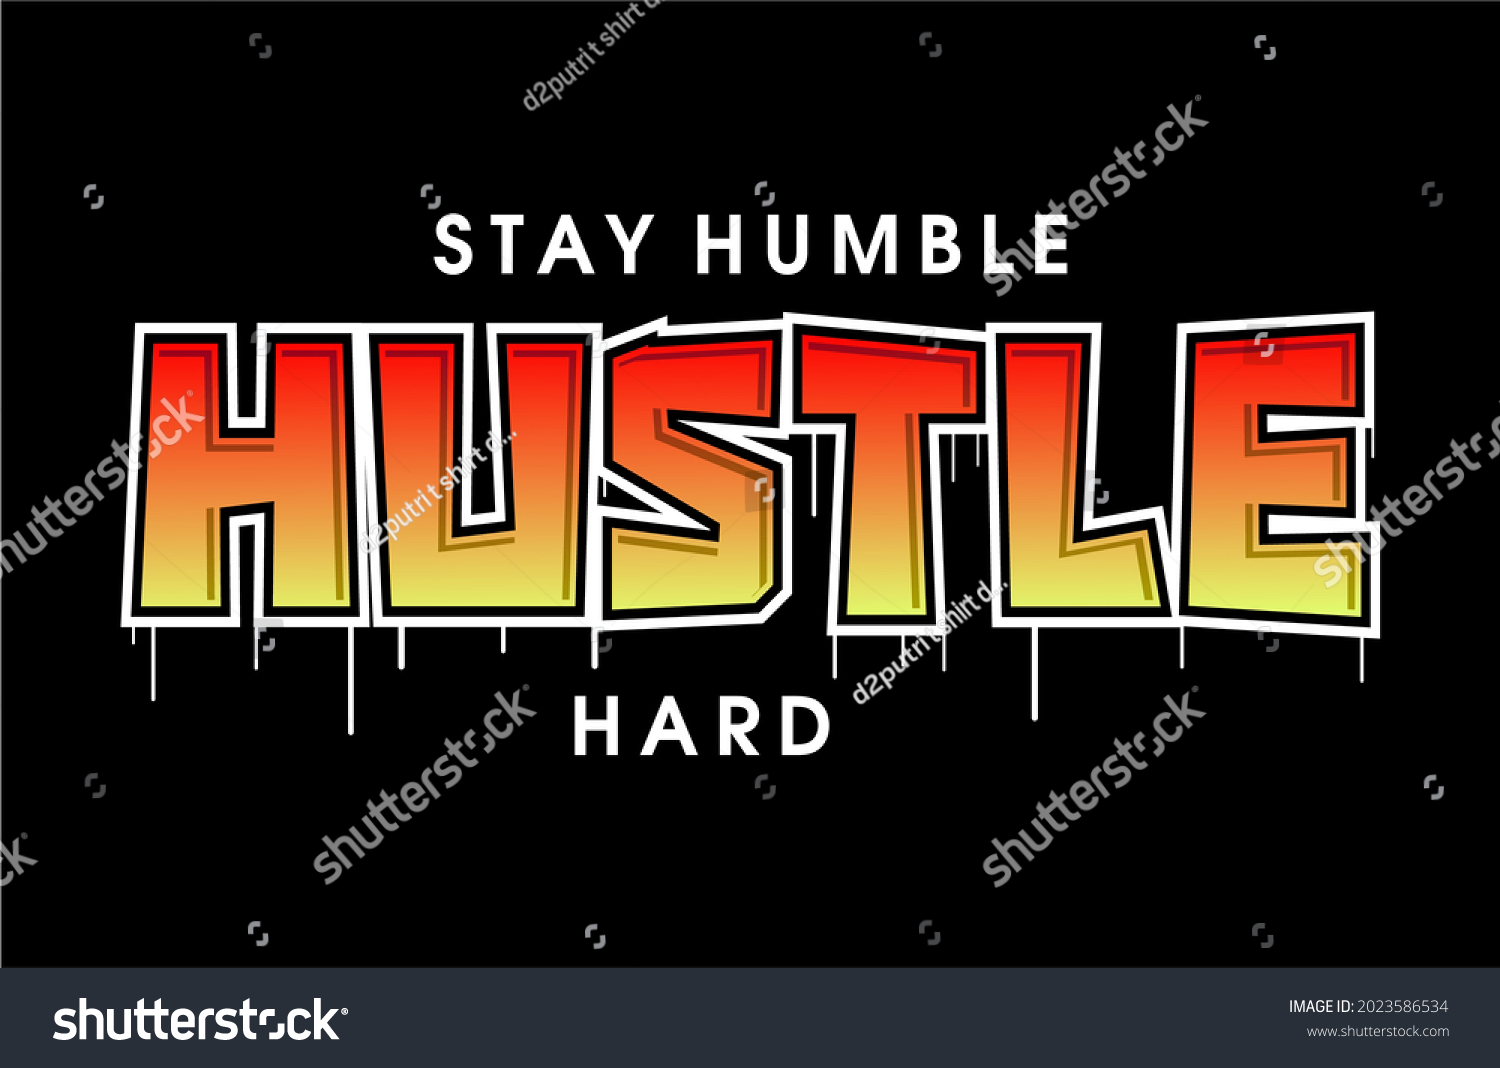 Stay Humble Hustle Hard Motivational Quote Stock Vector Royalty Free